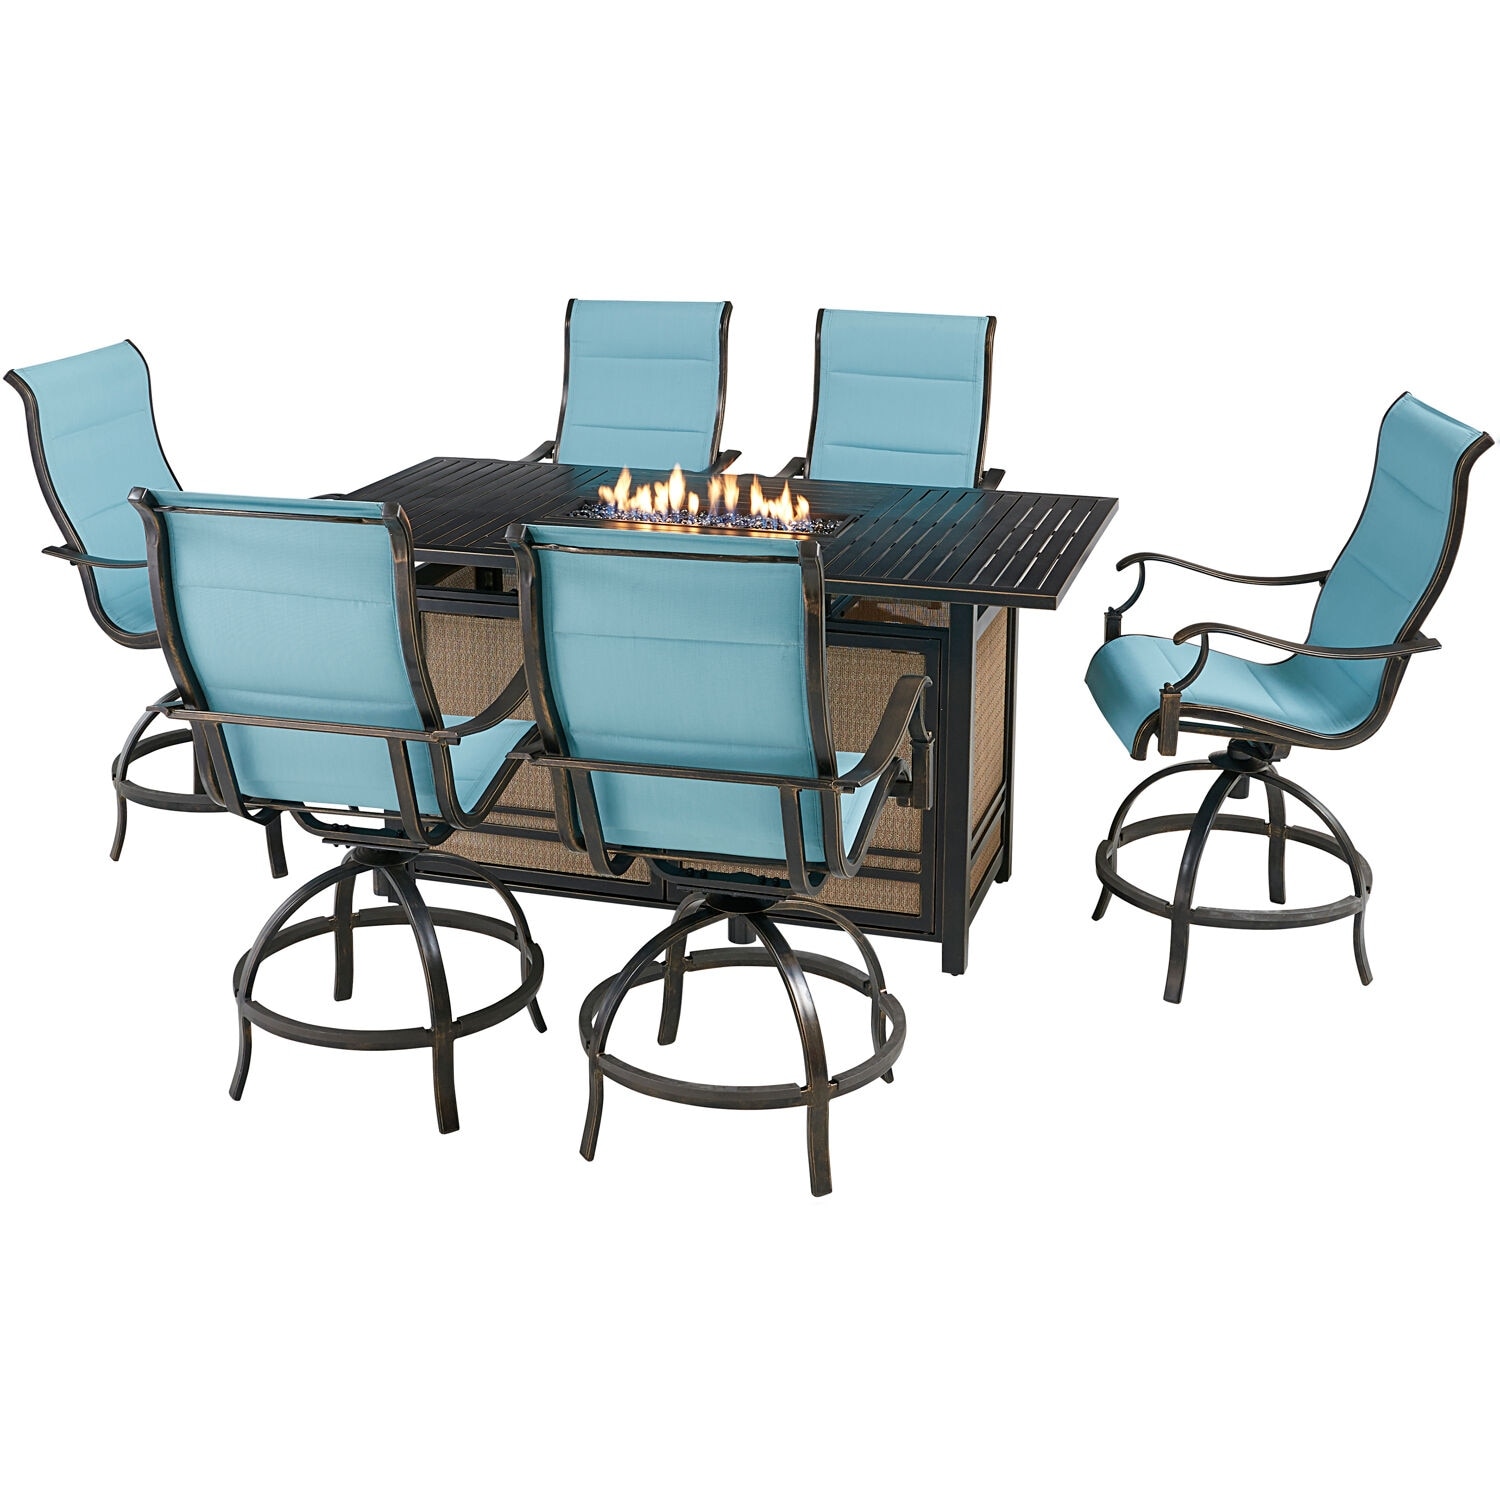 Hanover Traditions 7-Piece High-Dining Set in Blue with 6 Padded Counter-Height Swivel Chairs and a 30,000 BTU Fire Pit Table